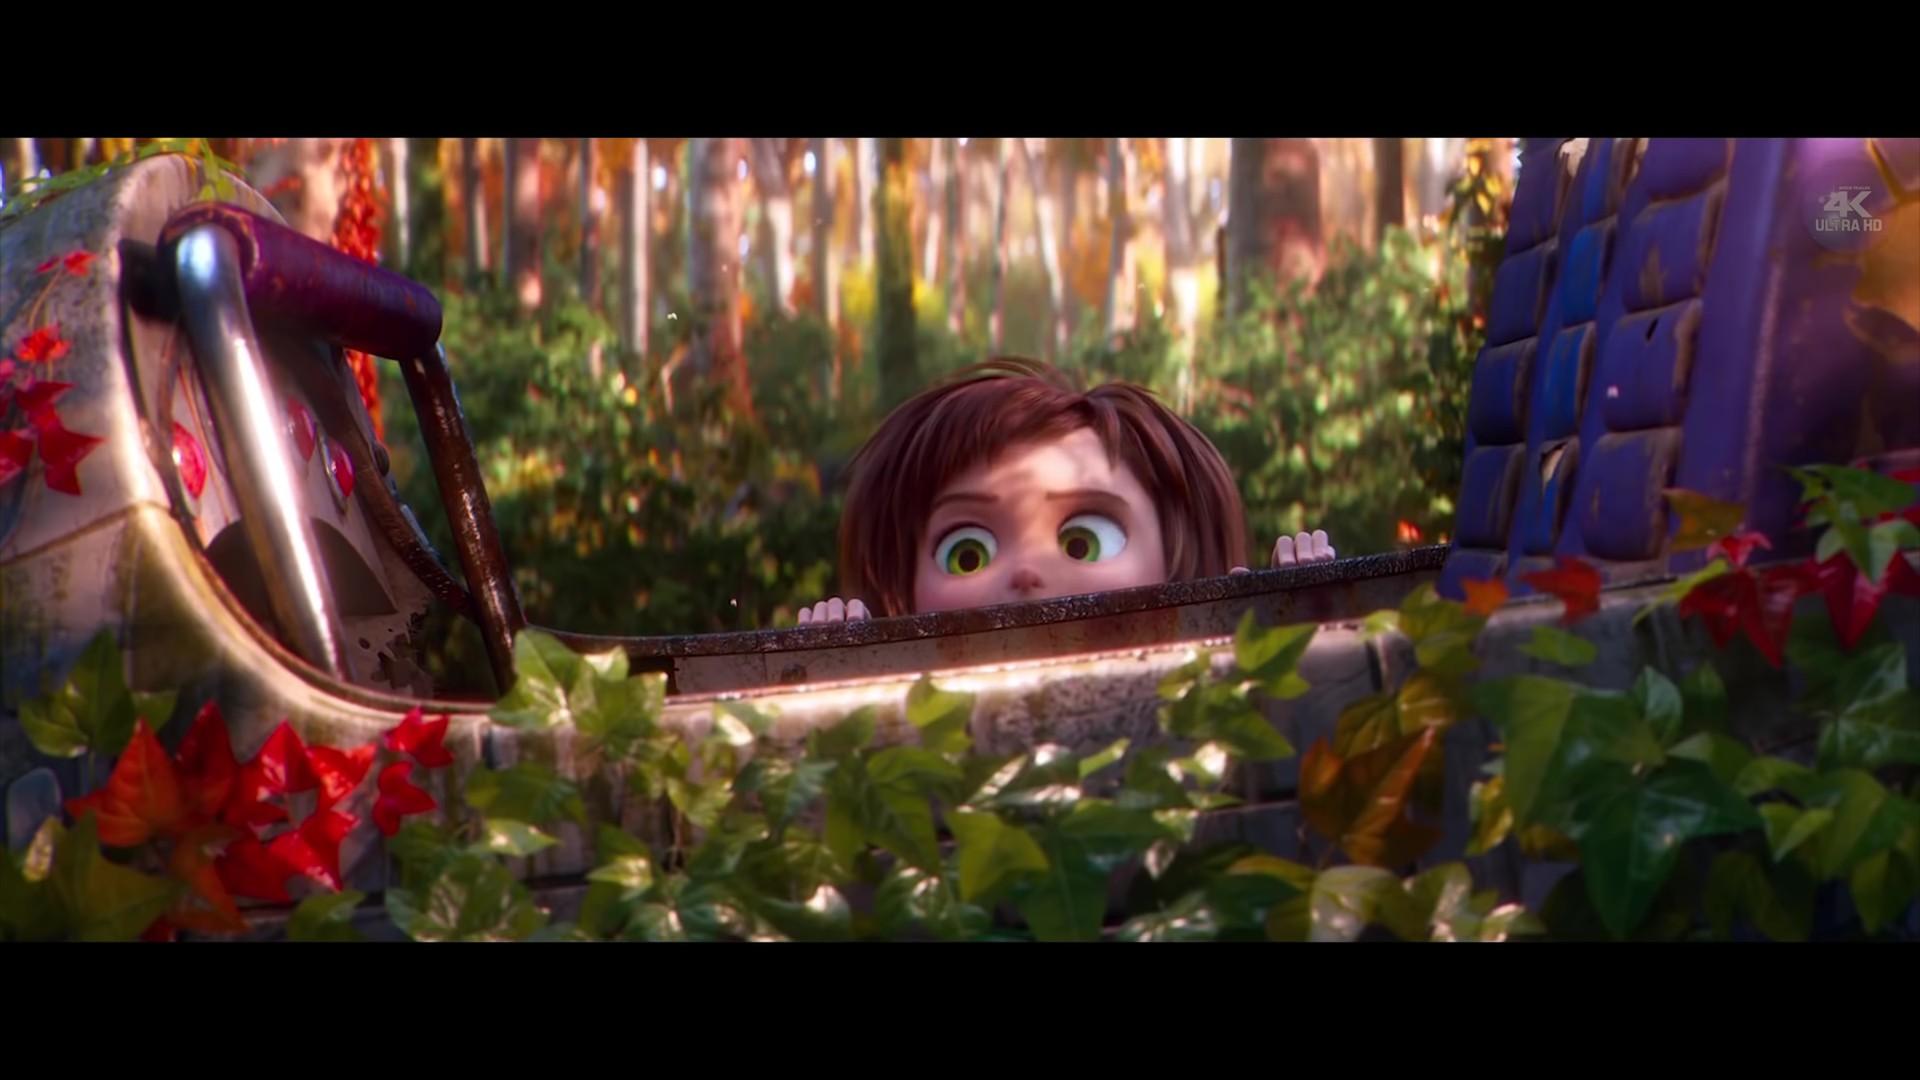 Wonder Park 2019 Wallpaper. Background games review, play